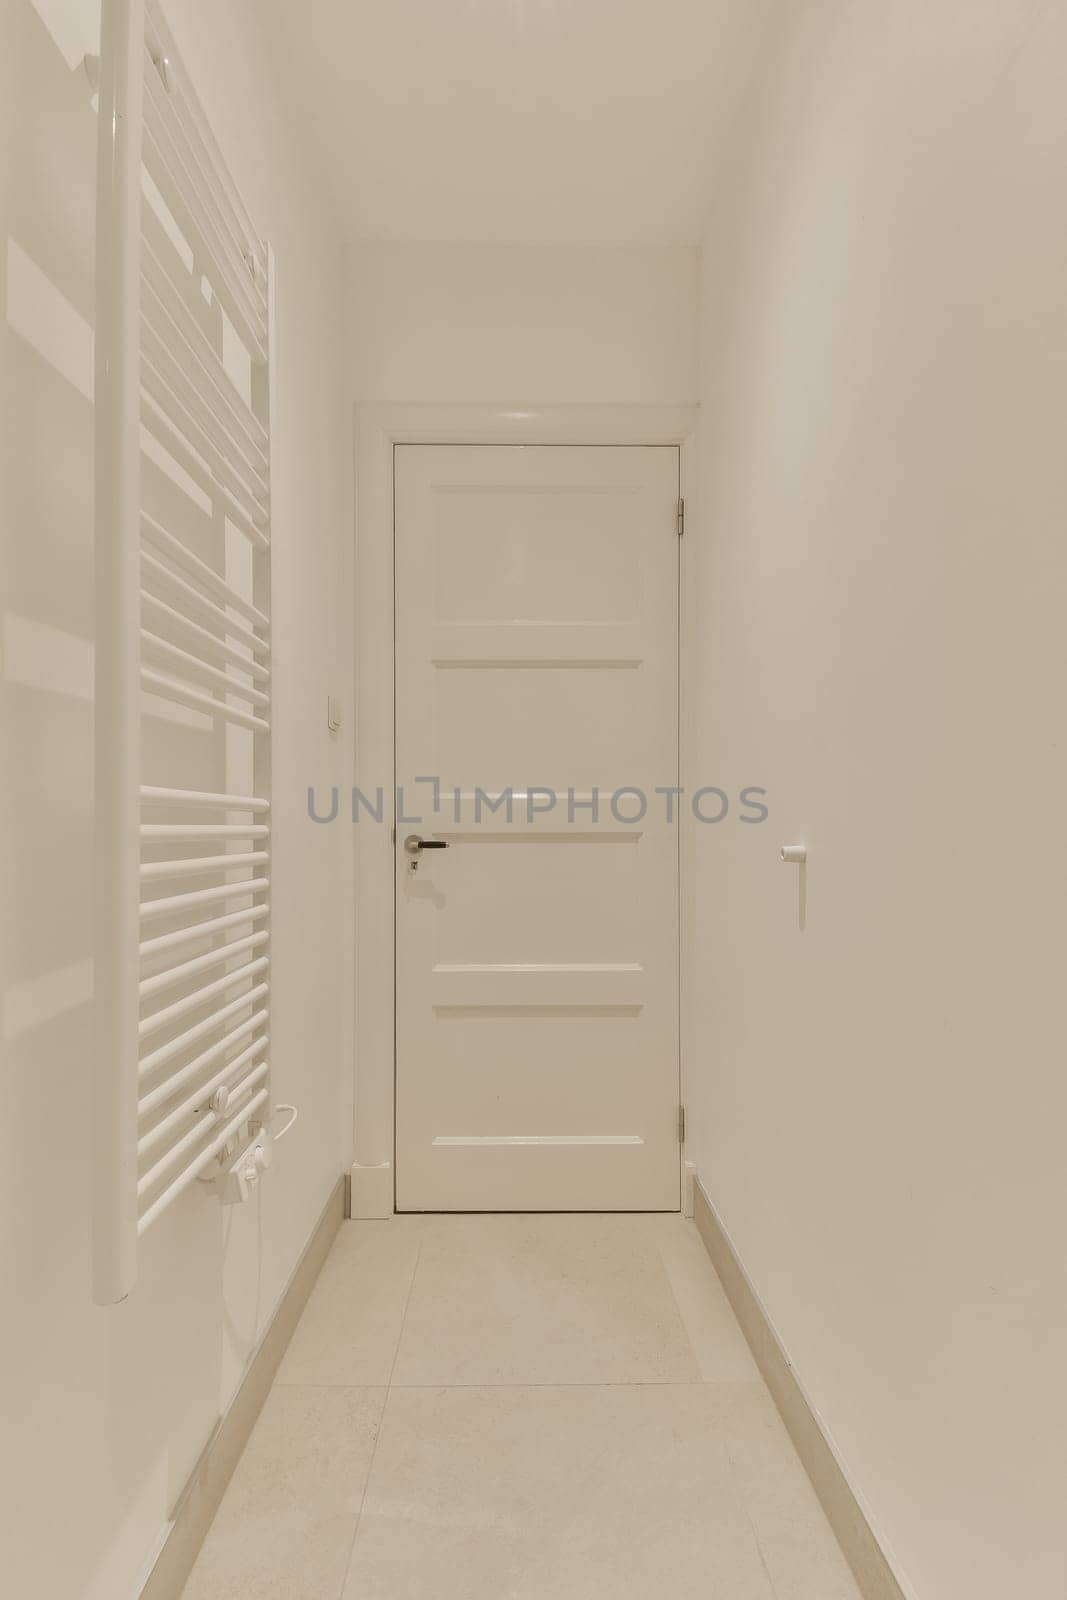 a long hallway with white walls and flooring on both sides, there is an open door in the middle